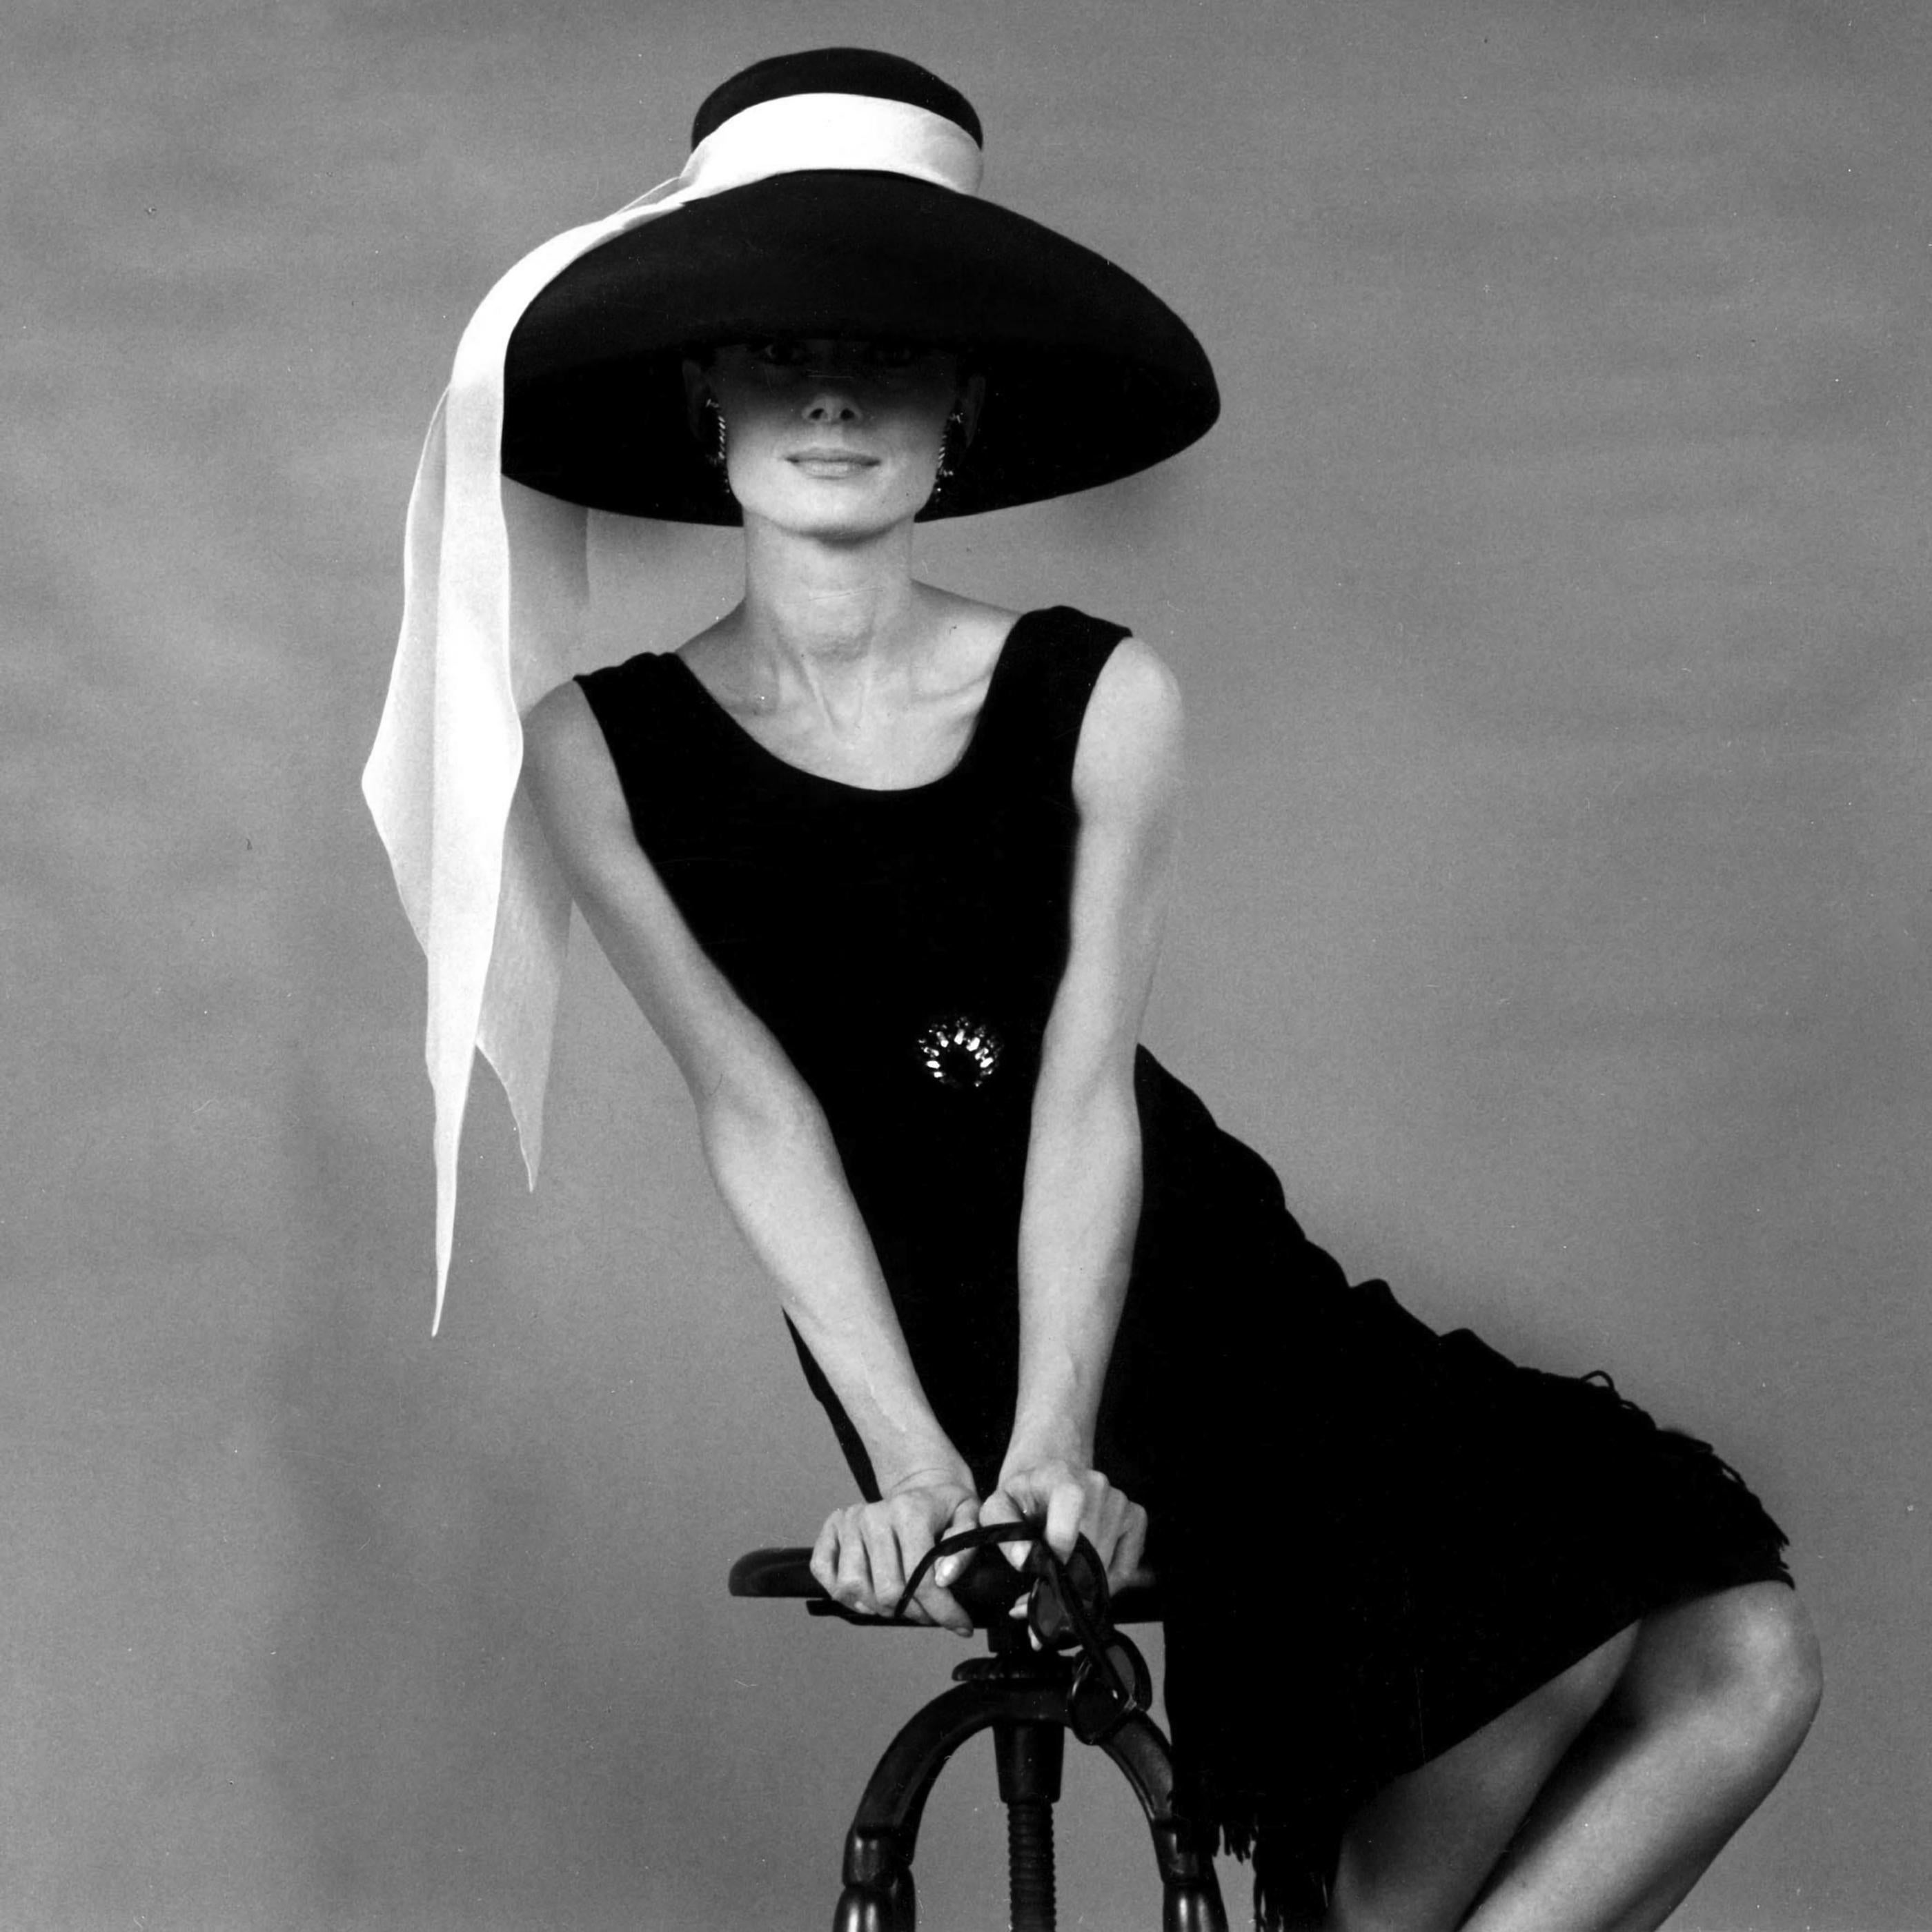 Unknown Portrait Photograph - Audrey Hepburn in Hat for "Breakfast at Tiffany's"